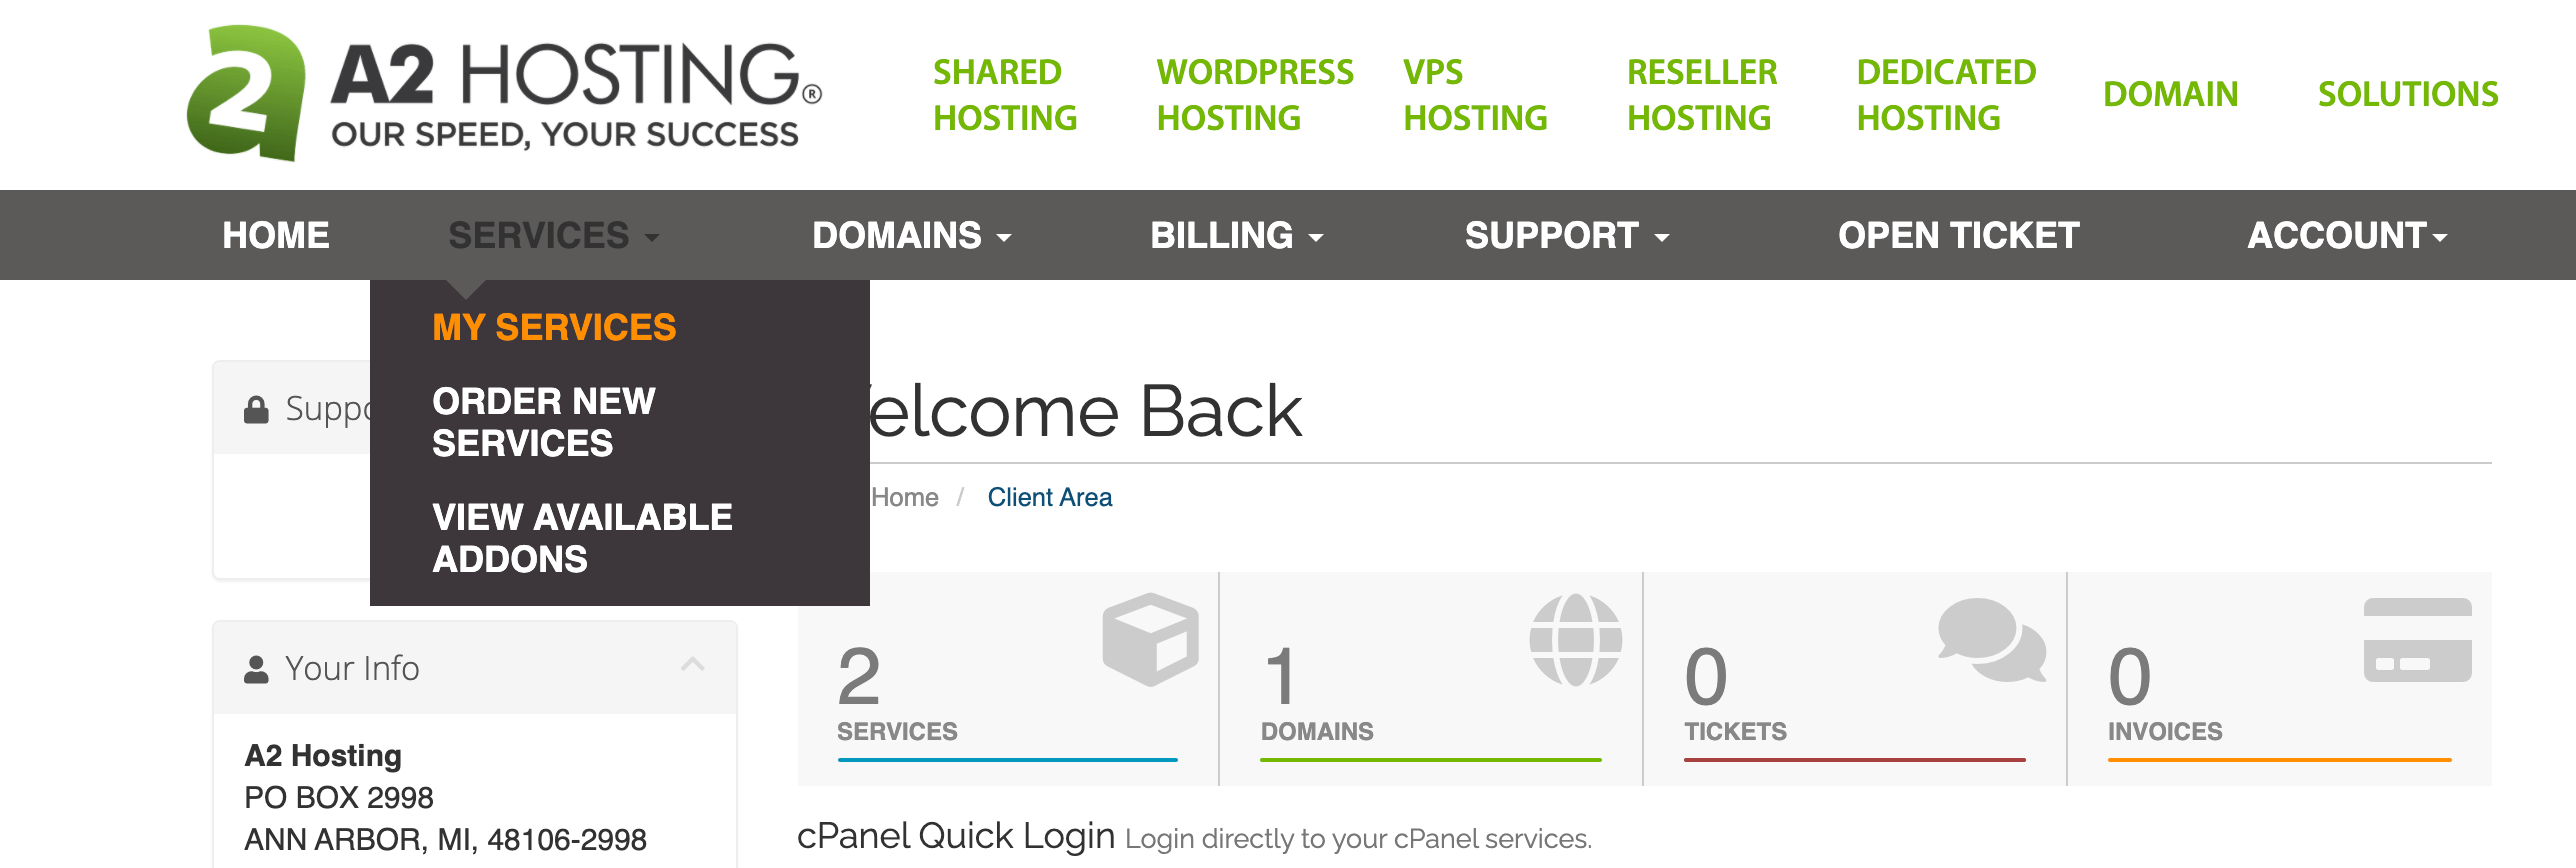 The 'Services' tab of the A2 Hosting Customer Portal menu.